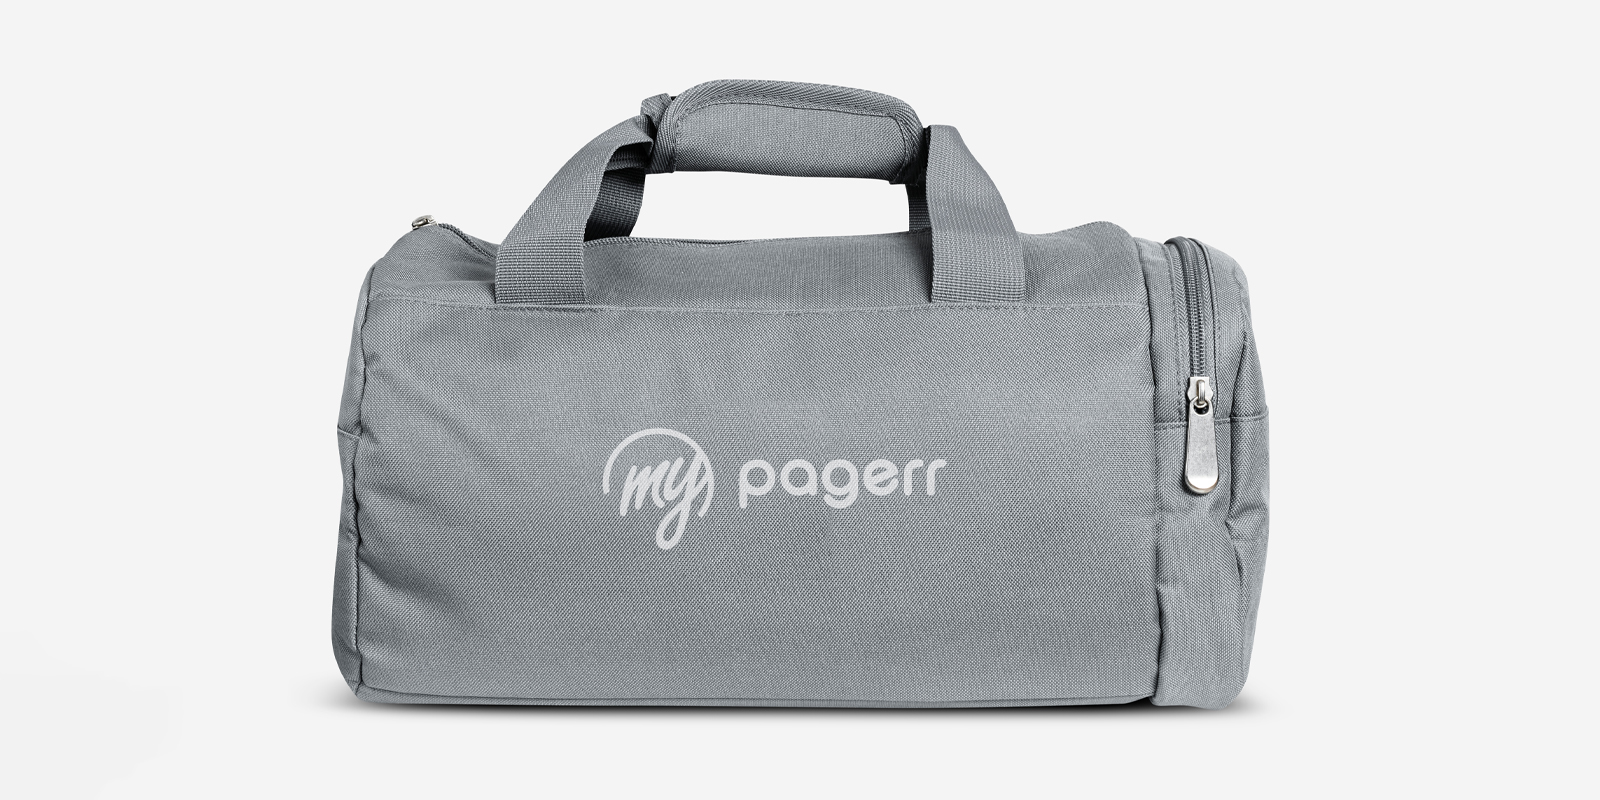 Duffel & gym bags in Paris - Print with Pagerr